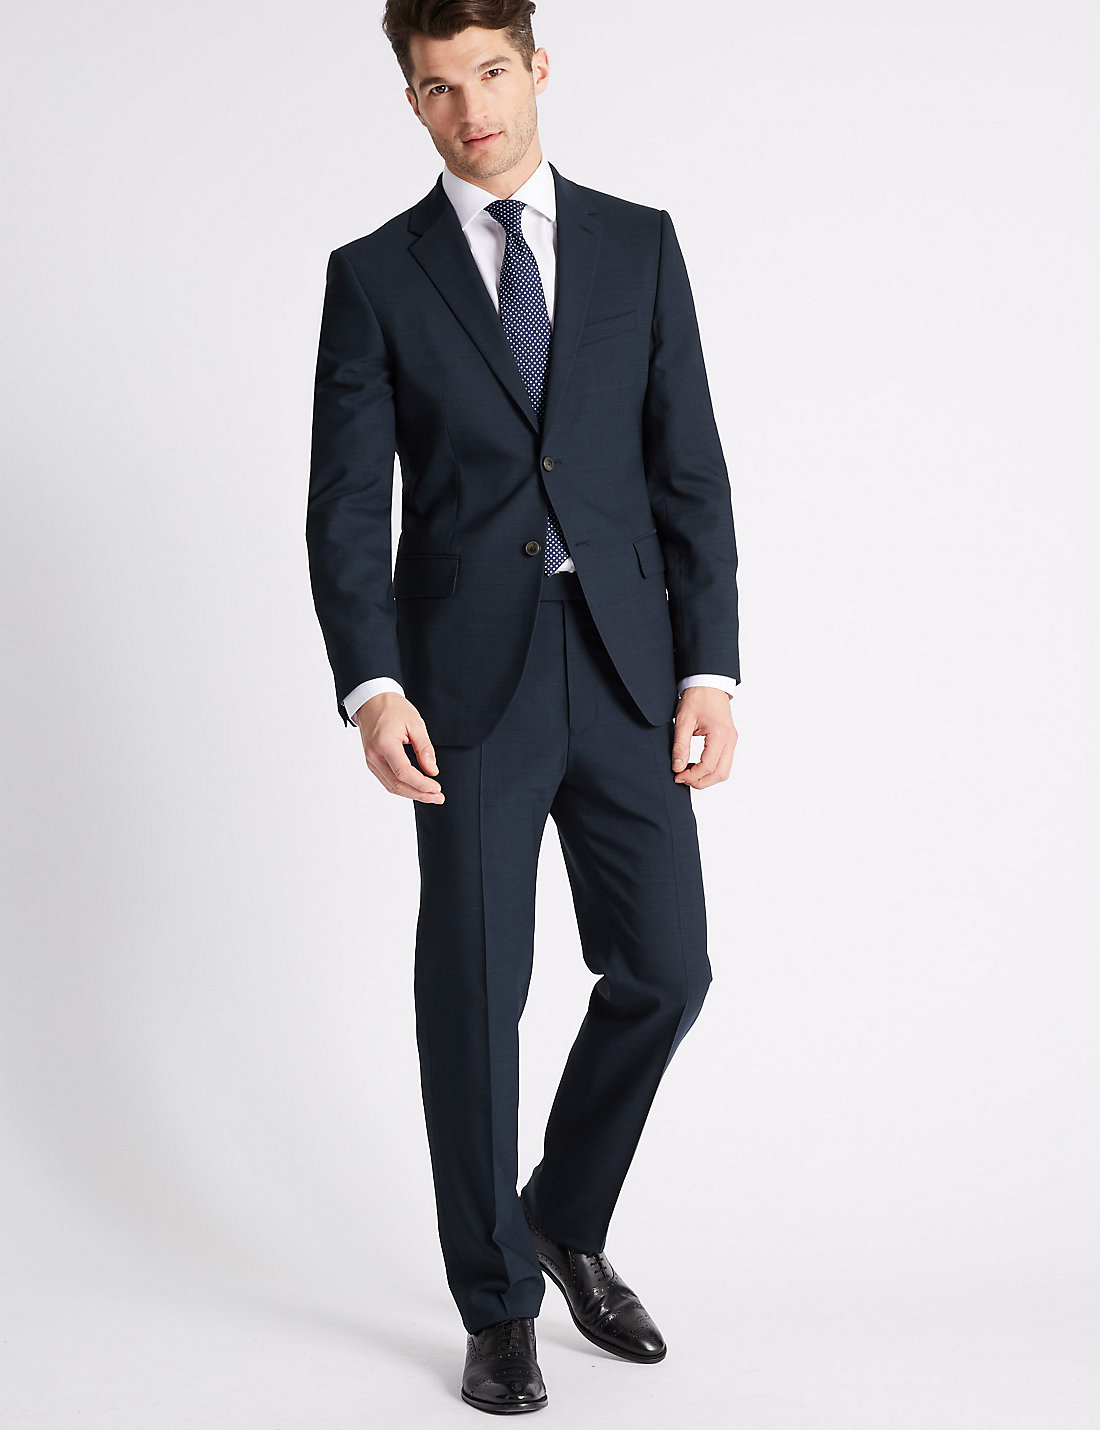 MALE MODELS IN SUITS: 2018